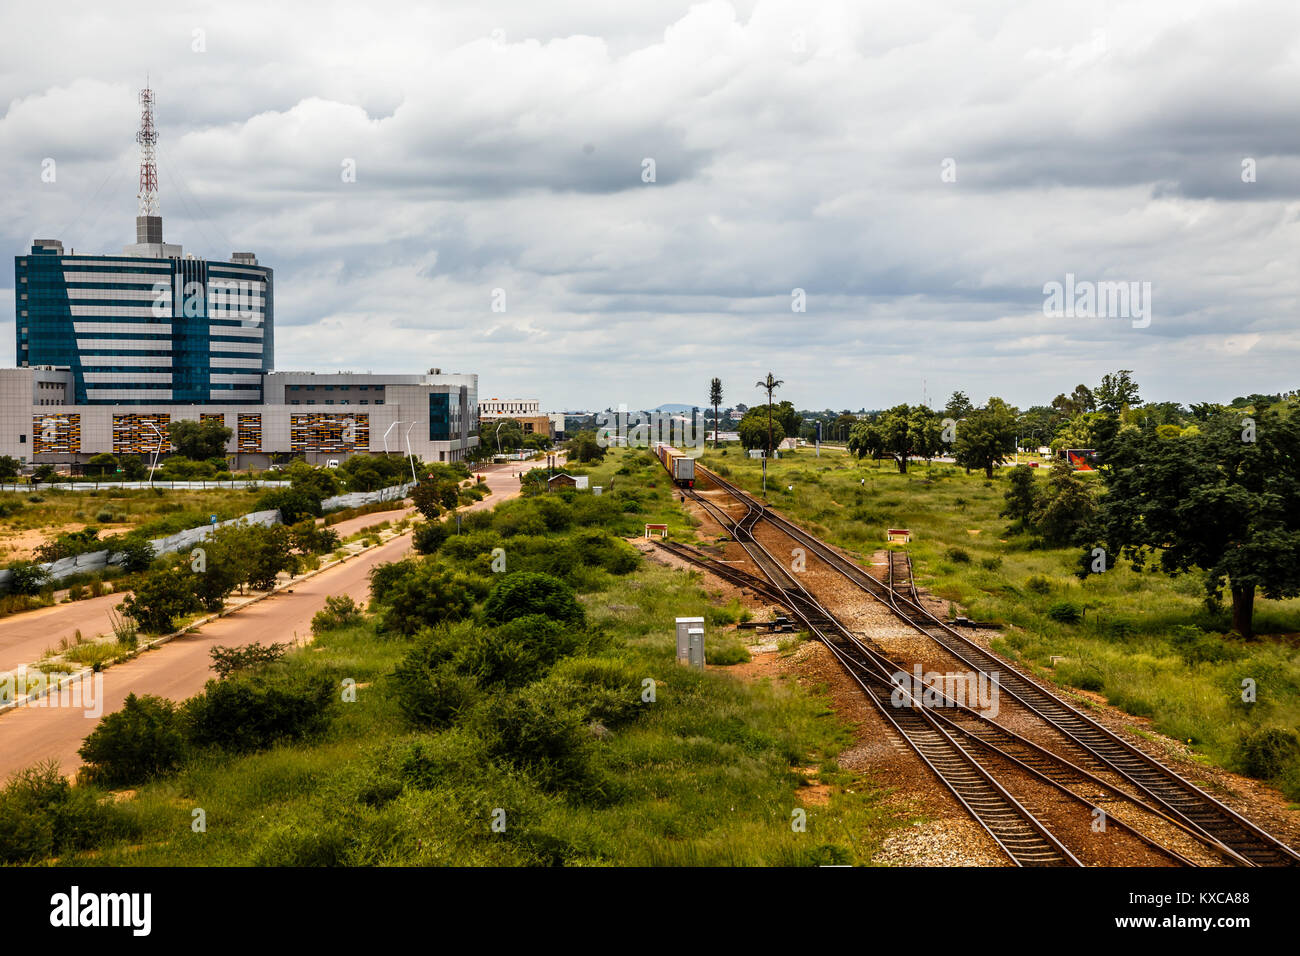 Railroad and rapidly developing central business district, Gaborone, Botswana, Africa, 2017 Stock Photo